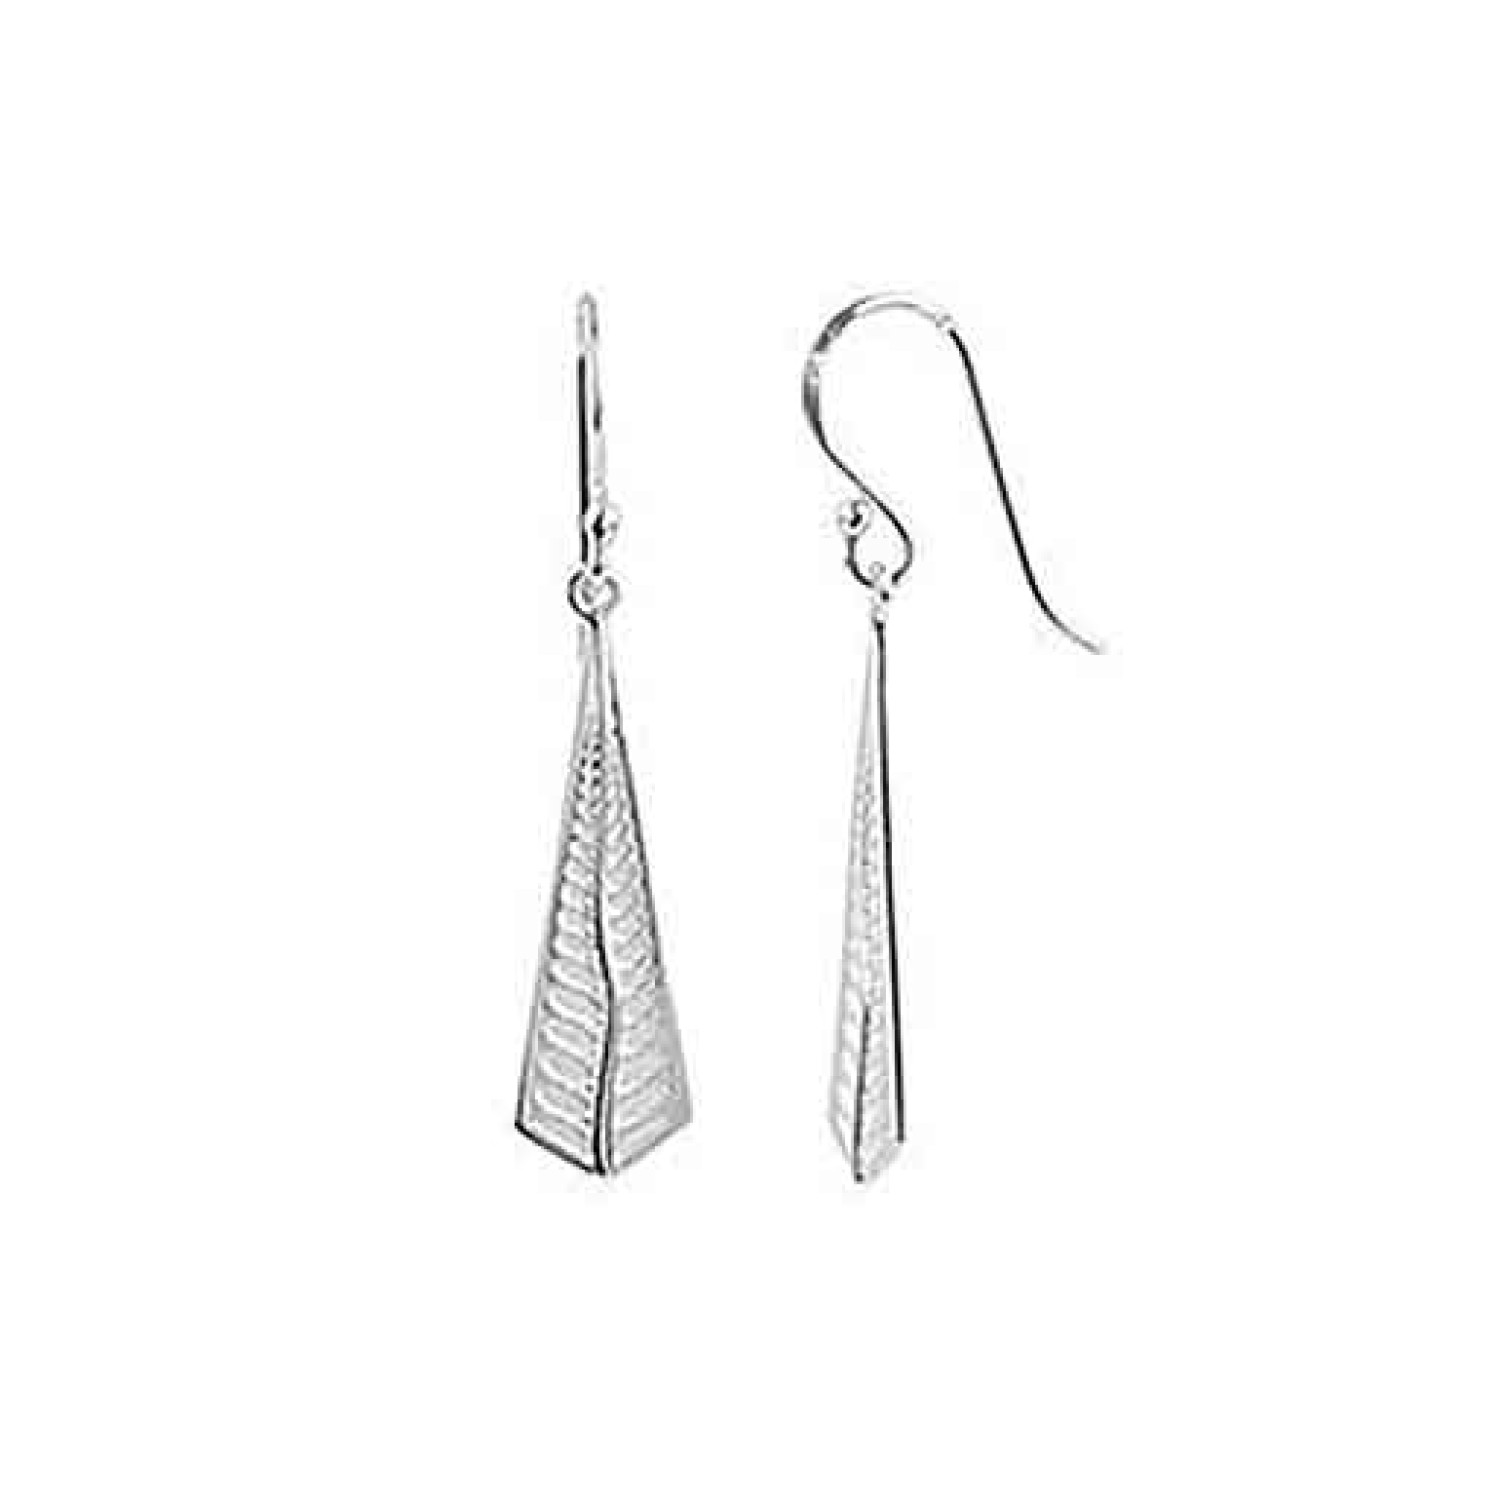 3E31030 Evolve Coastal Fern Drop Earrings. New Zealand’s highly treasured symbol, the silver fern, is emblazoned on these brushed silver drops. This treasured fern evokes a sense of pride and admiration for our country and all it has to offer. New Zealand